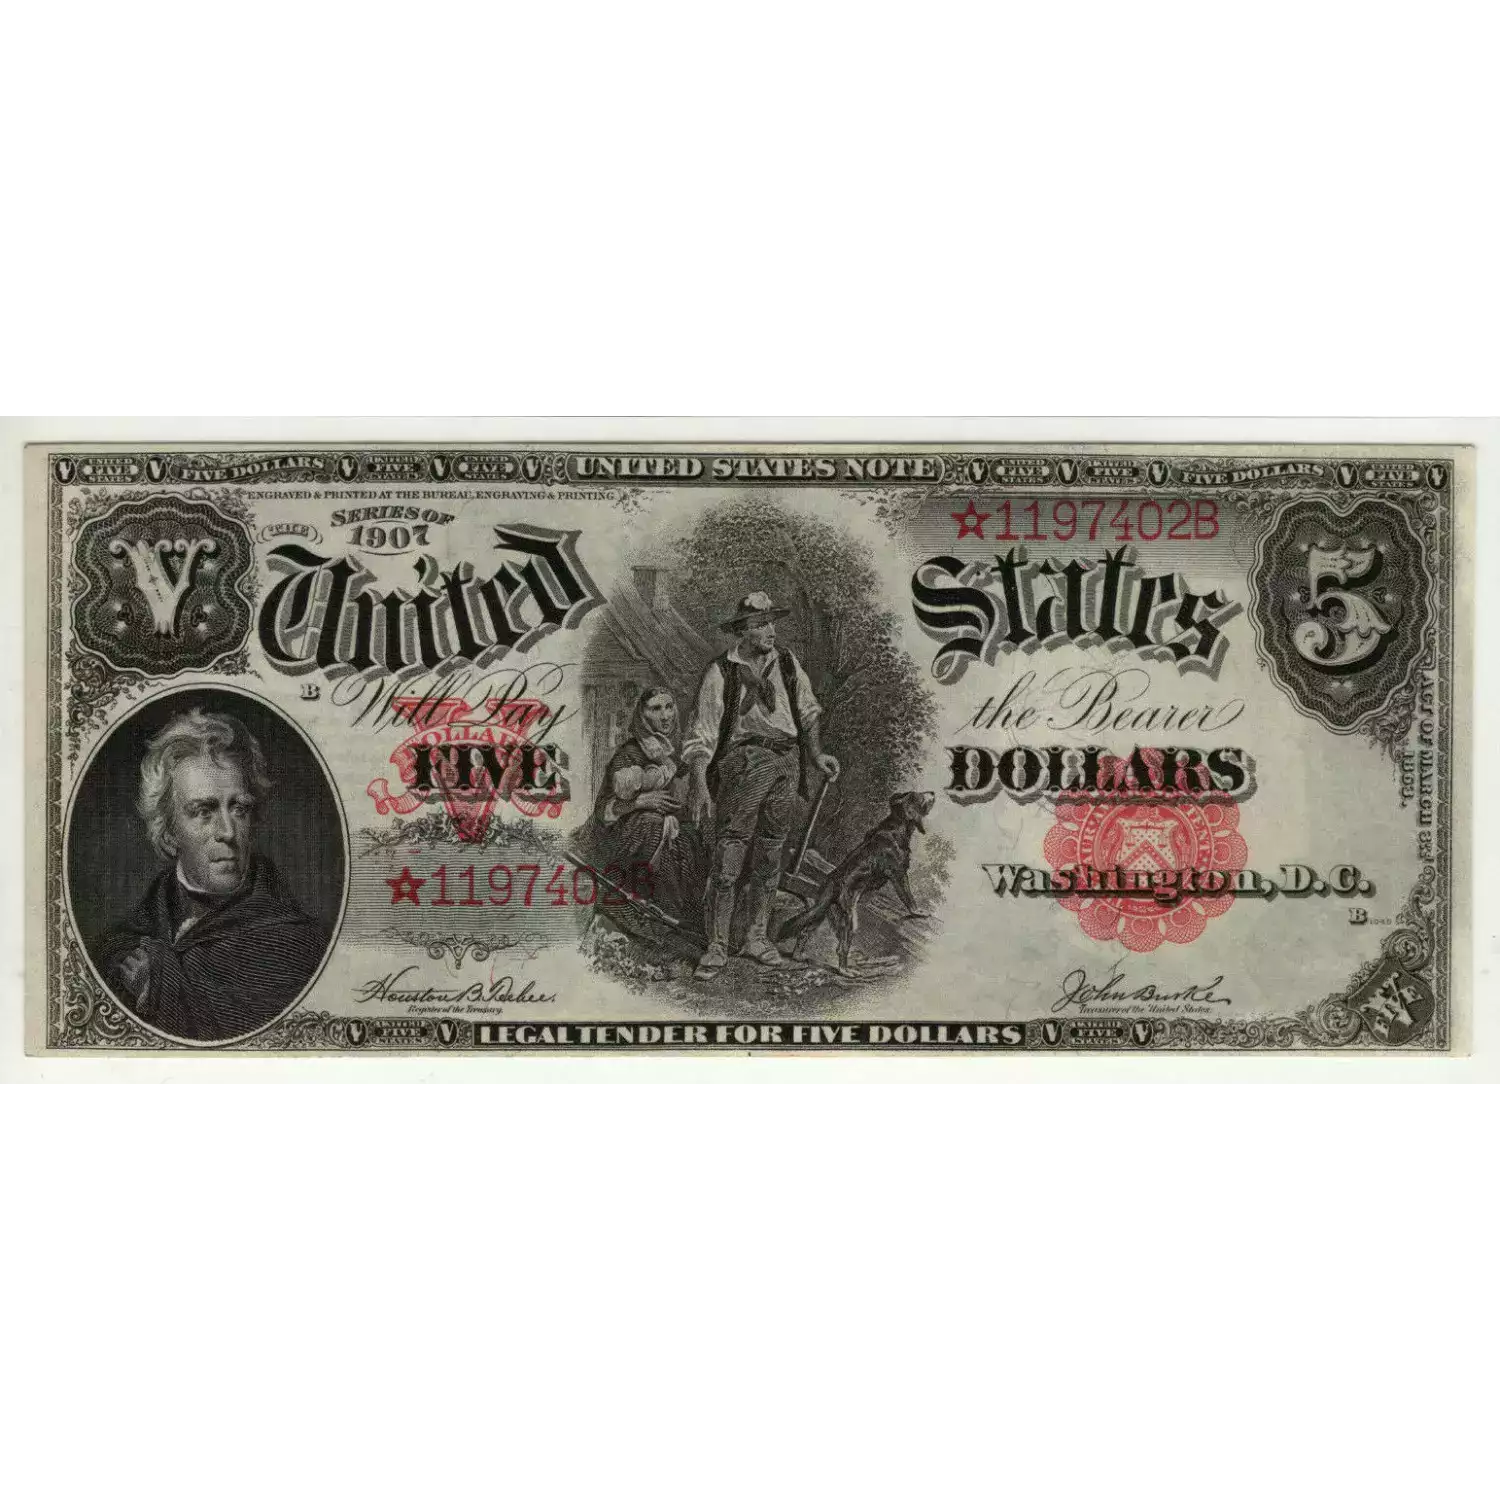 $5  Small Red, scalloped Legal Tender Issues 88*